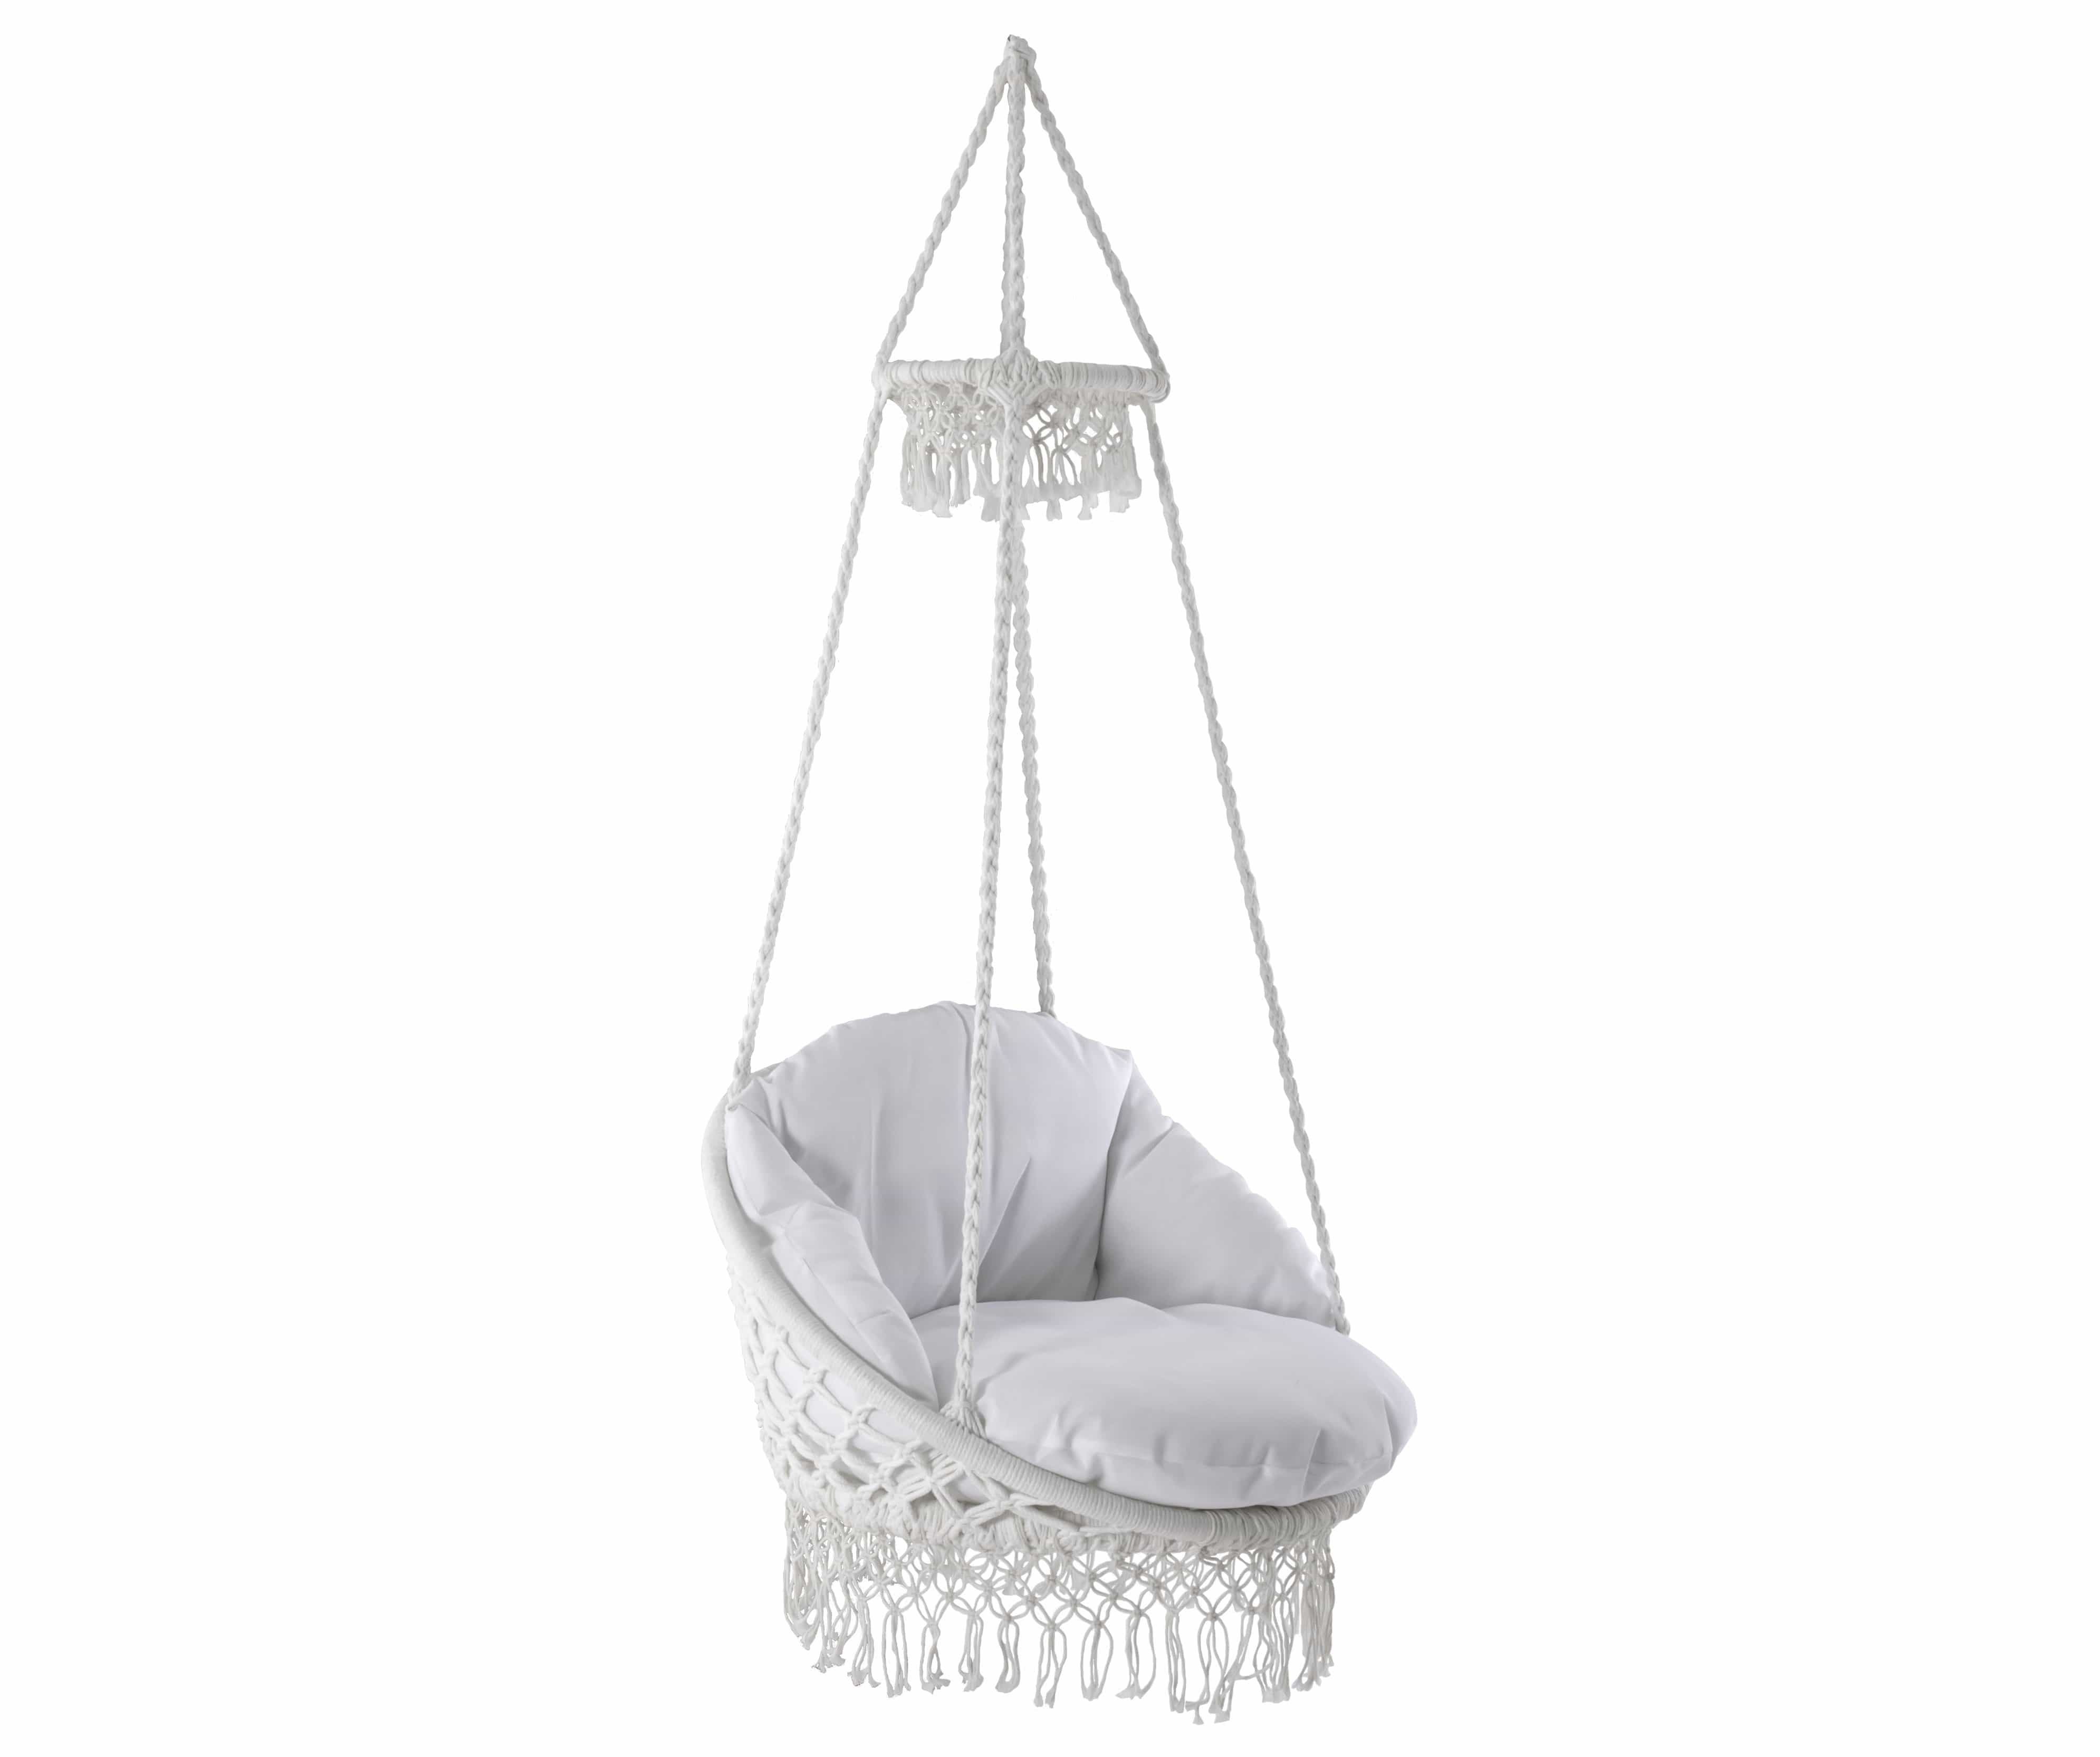 Deluxe Macrame Hanging Chair With Cushion - JUST Hammocks